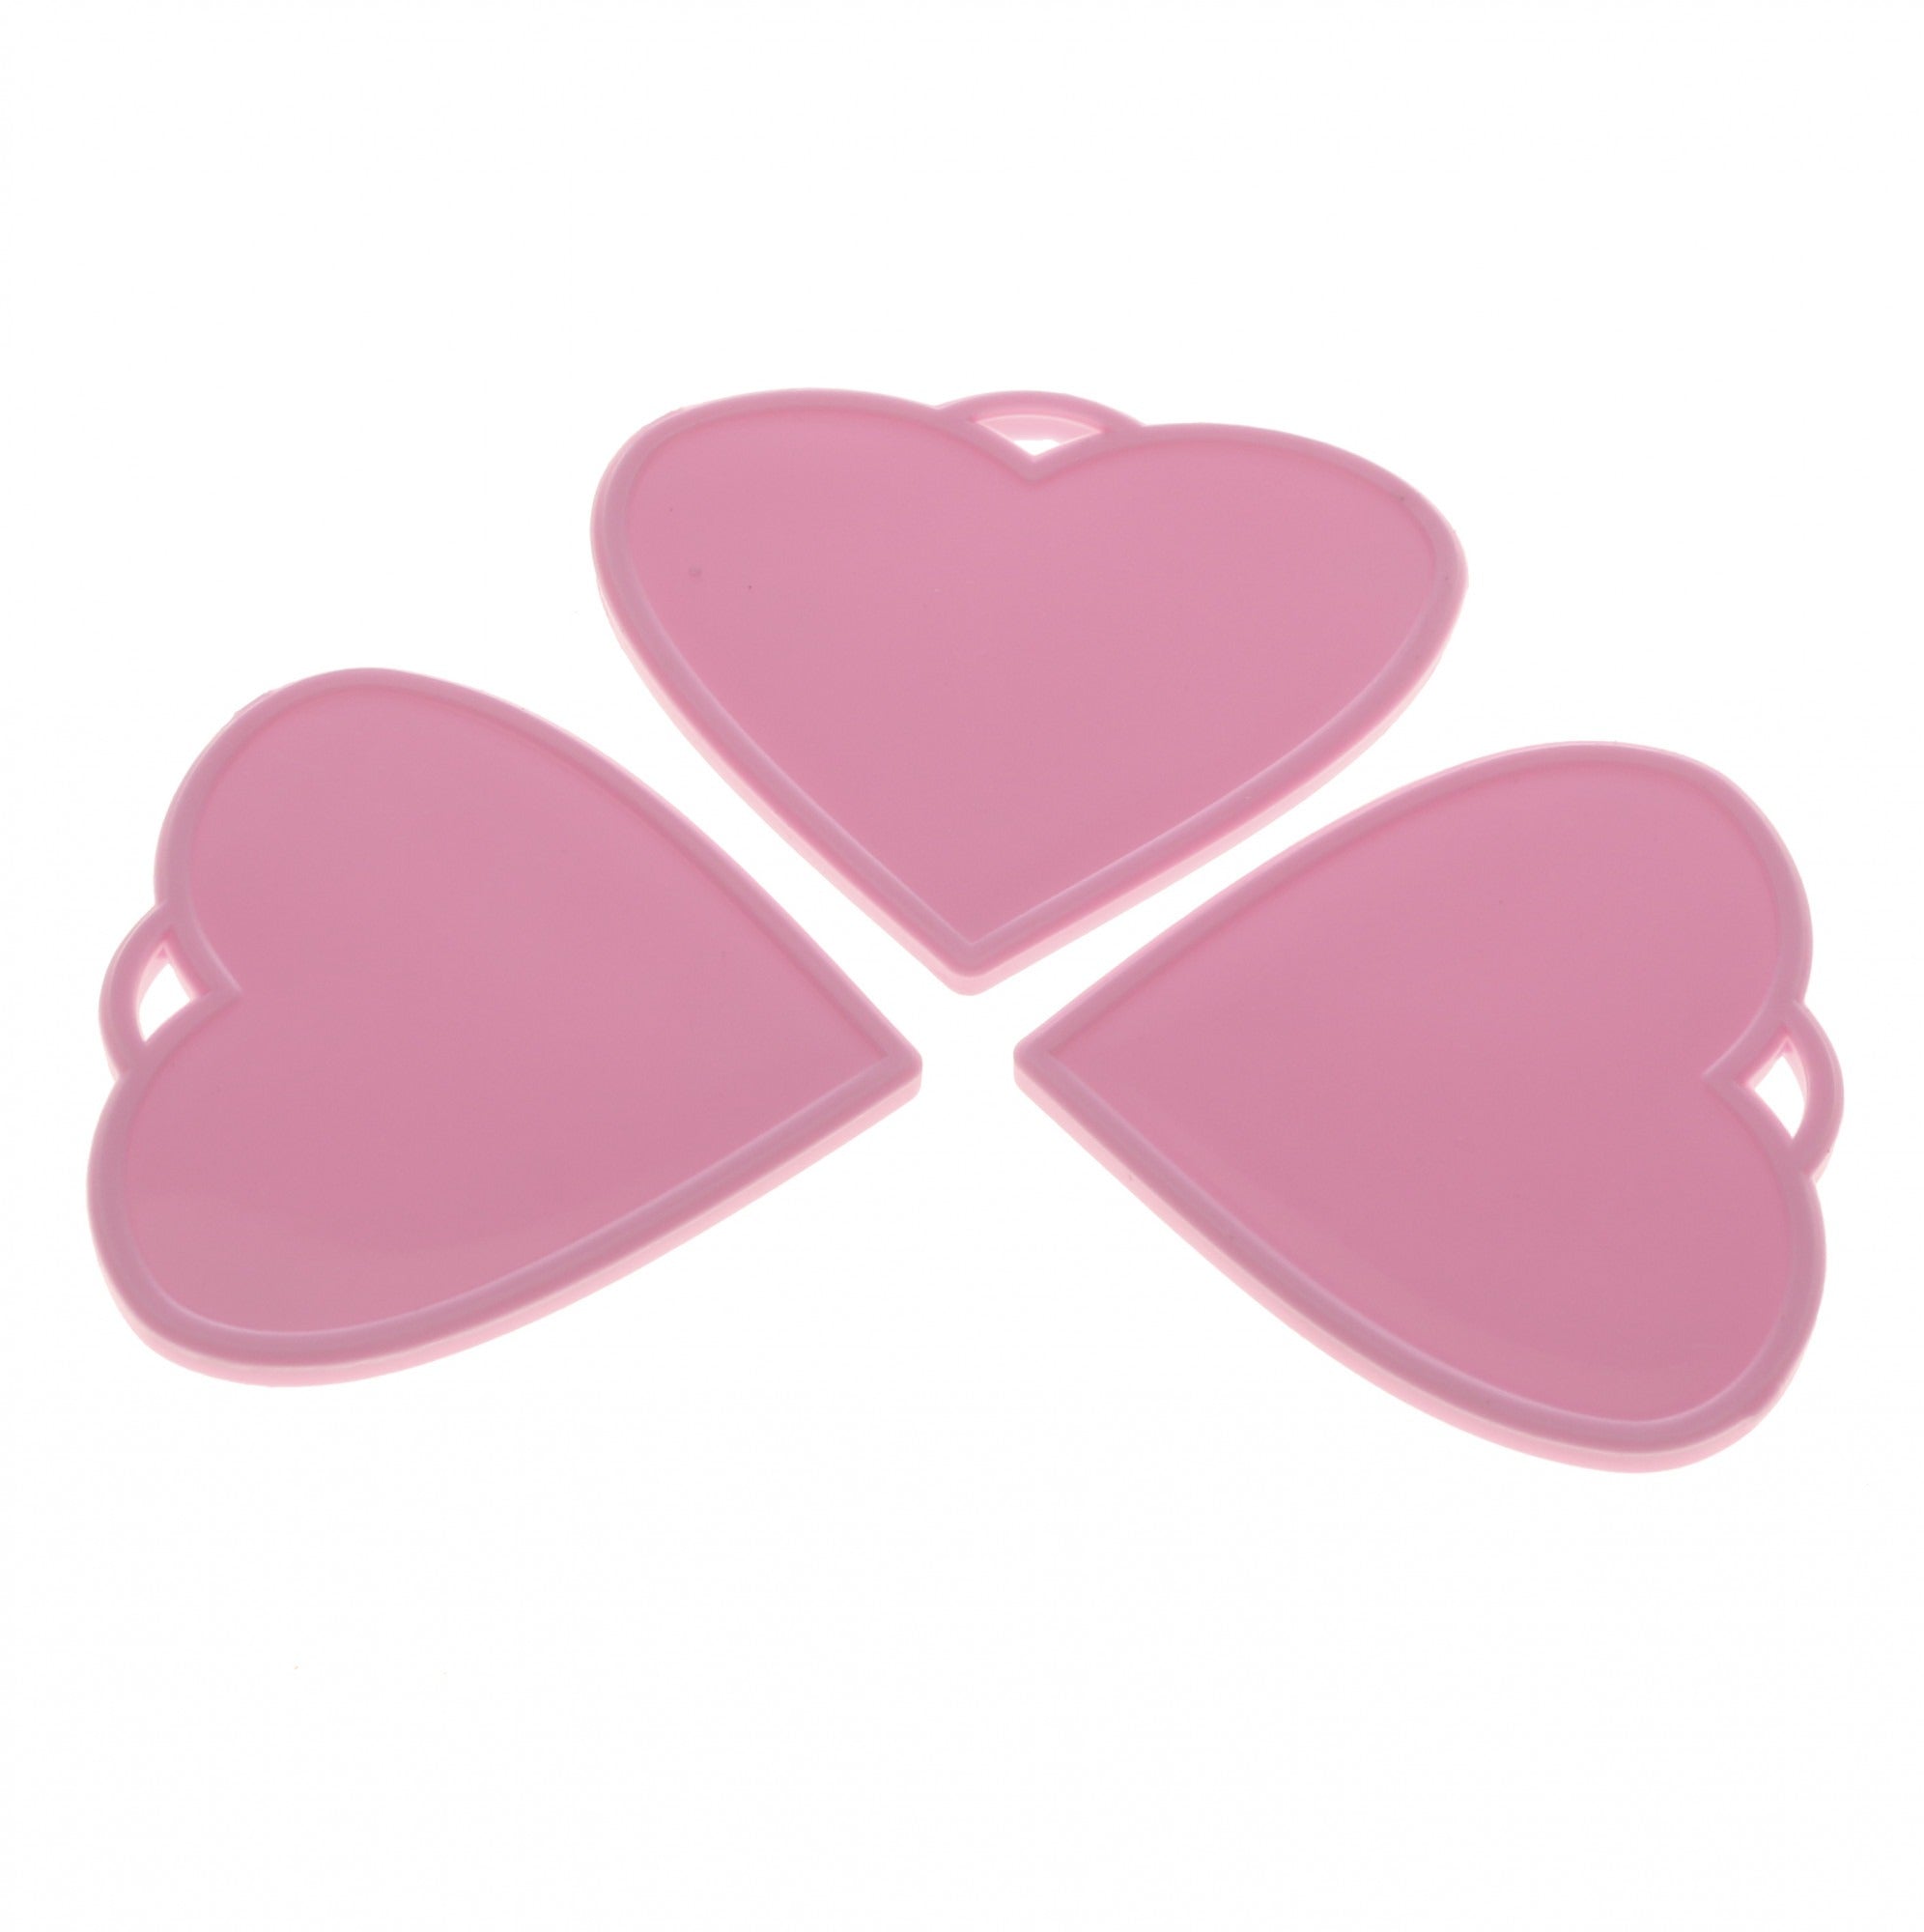 View Baby Pink Heart Shape Weights x50 information